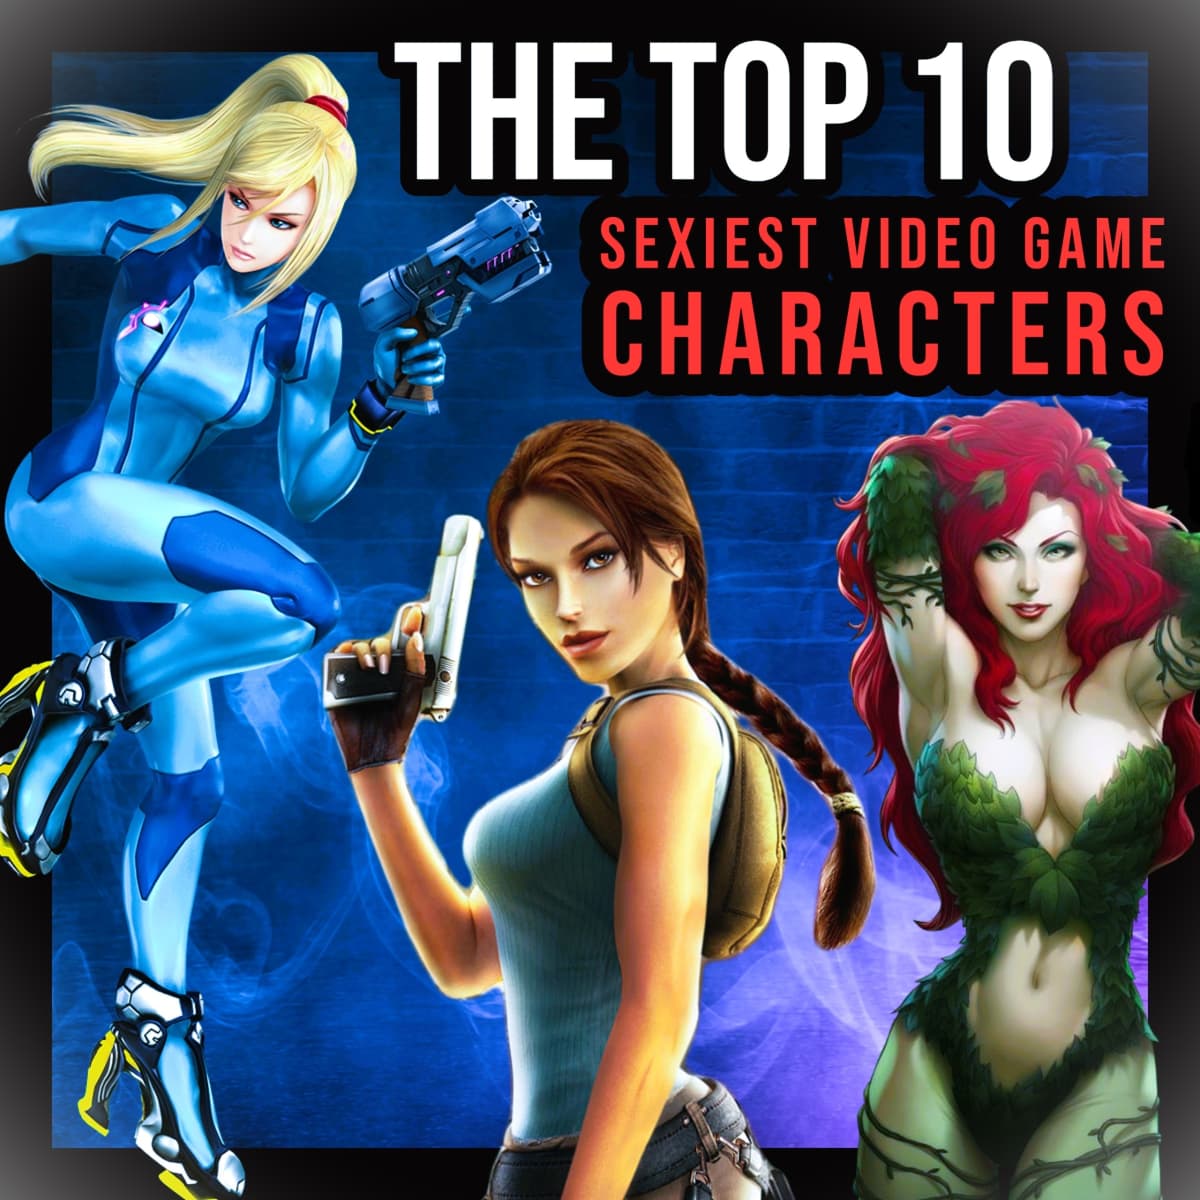 The Top 10 Sexiest Video Game Characters - LevelSkip